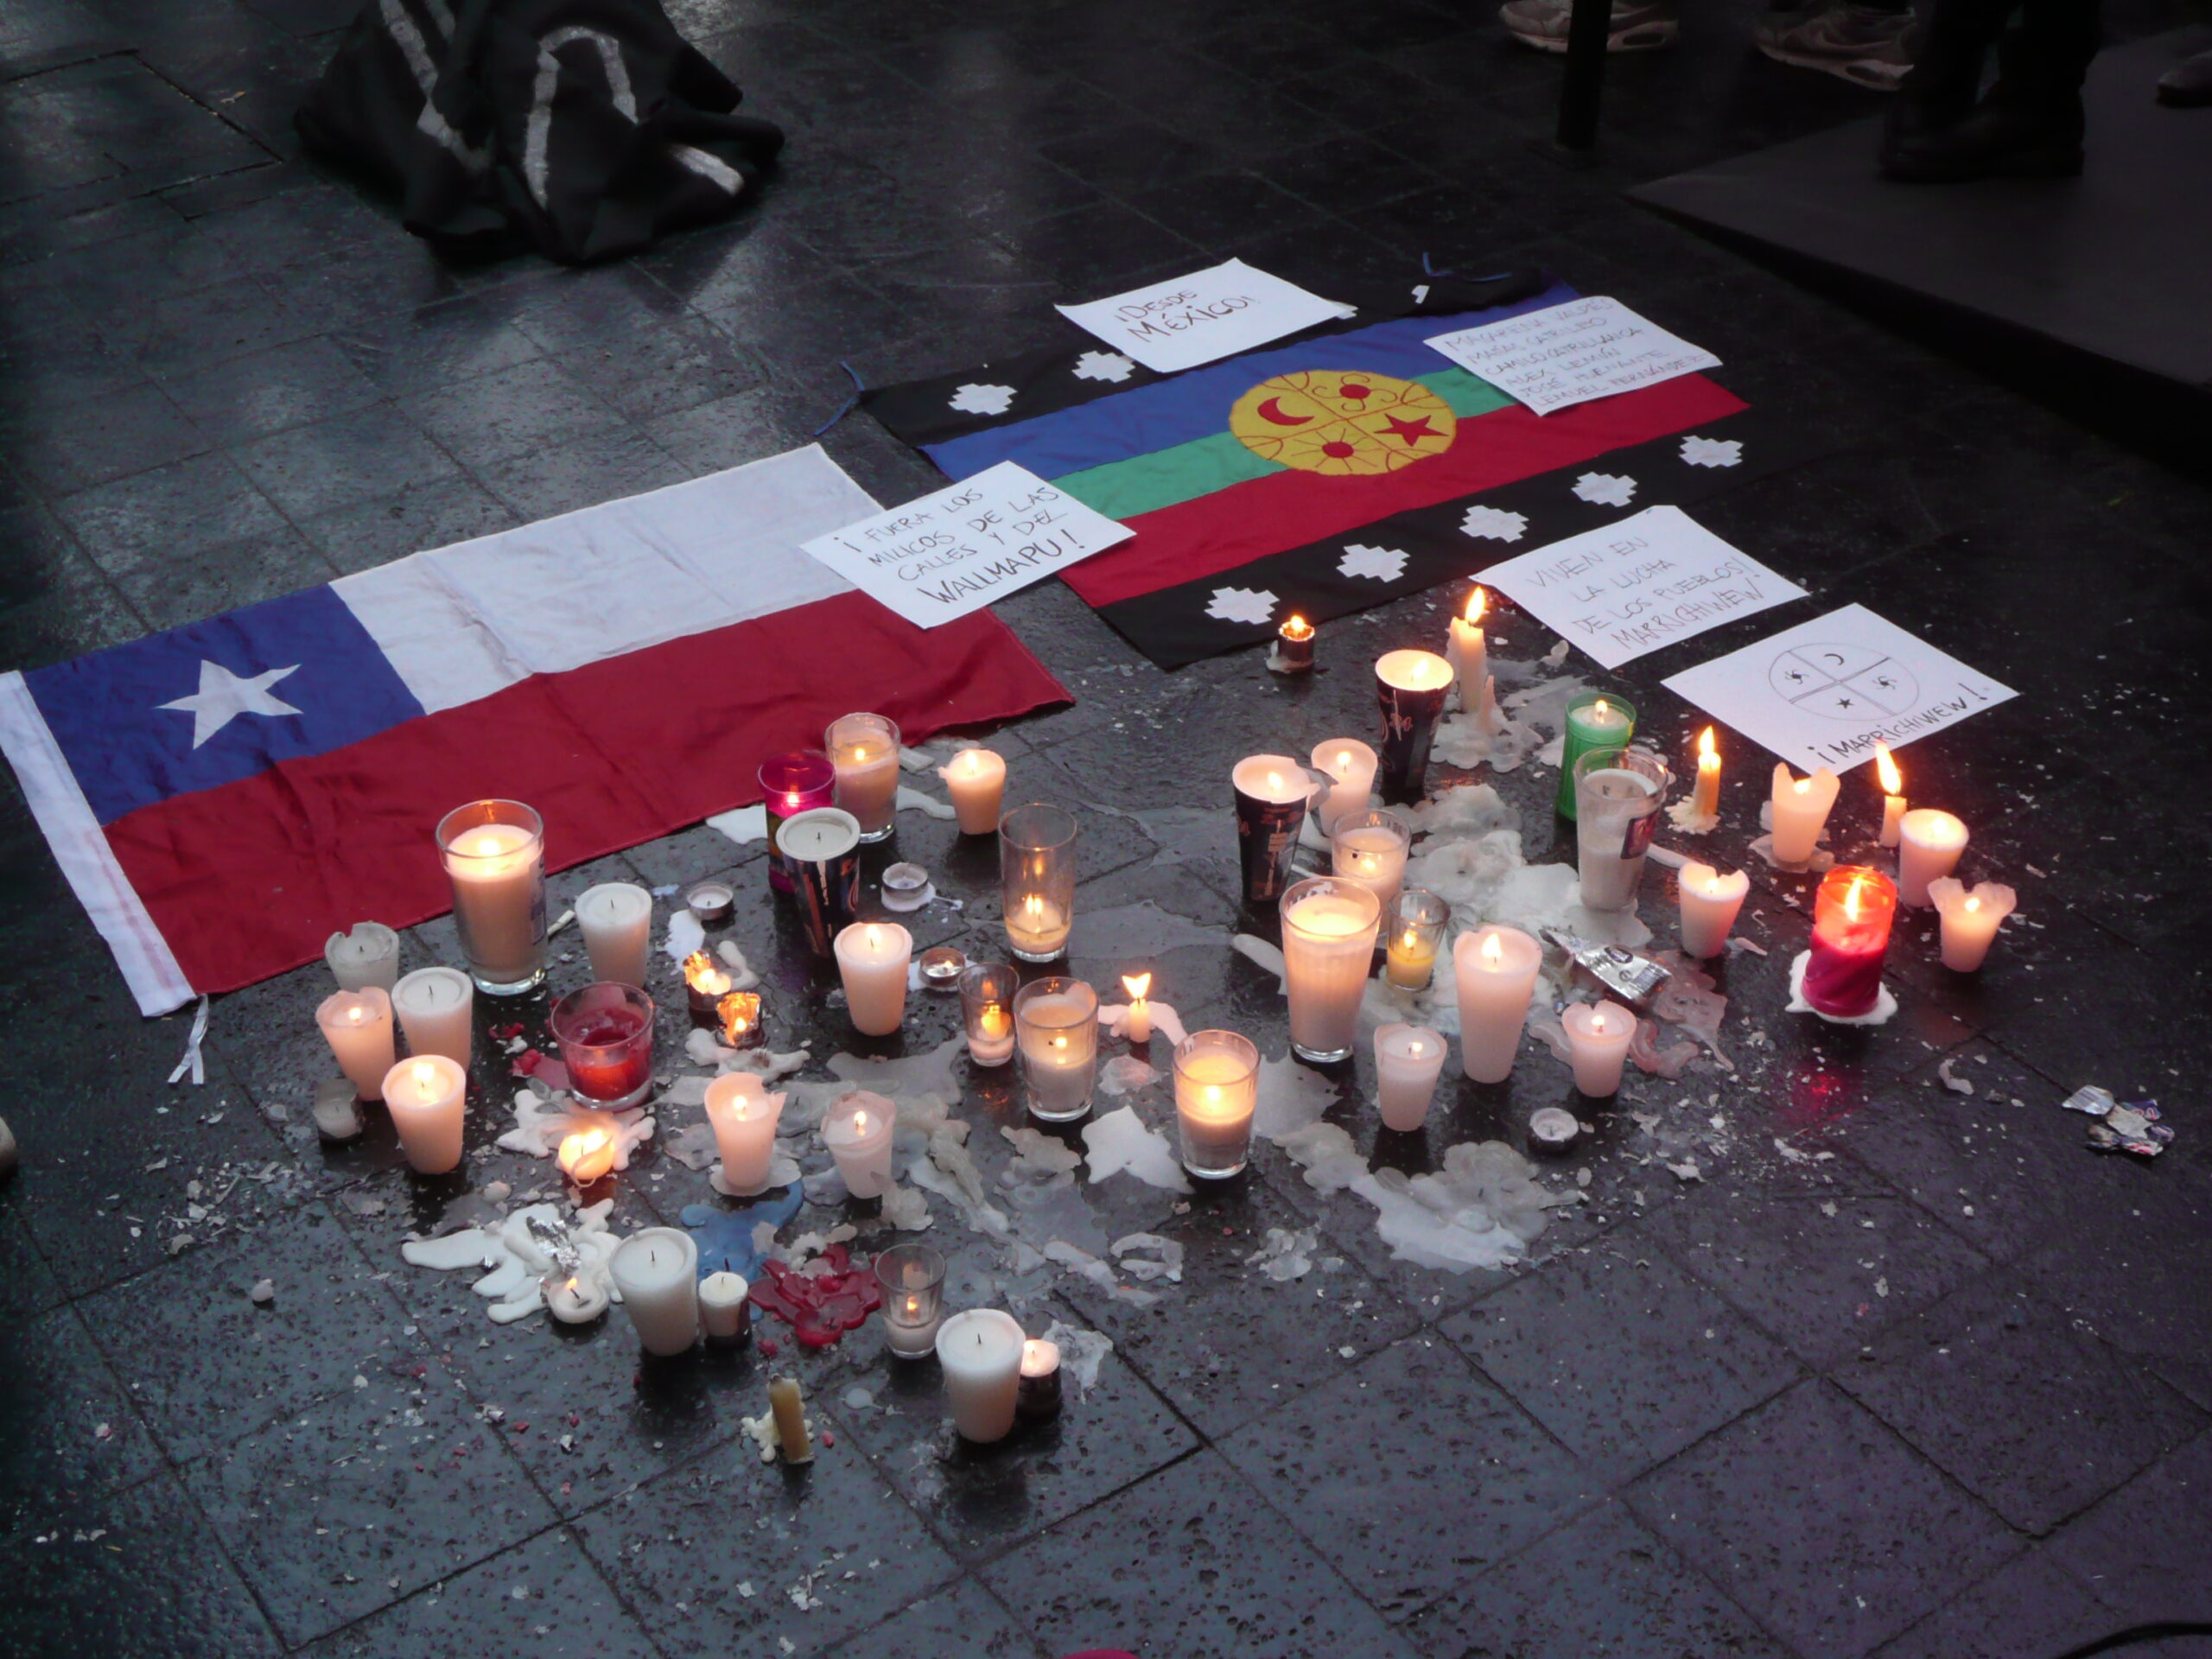 A Chilean flag is surrounded by candles and messages on the ground.